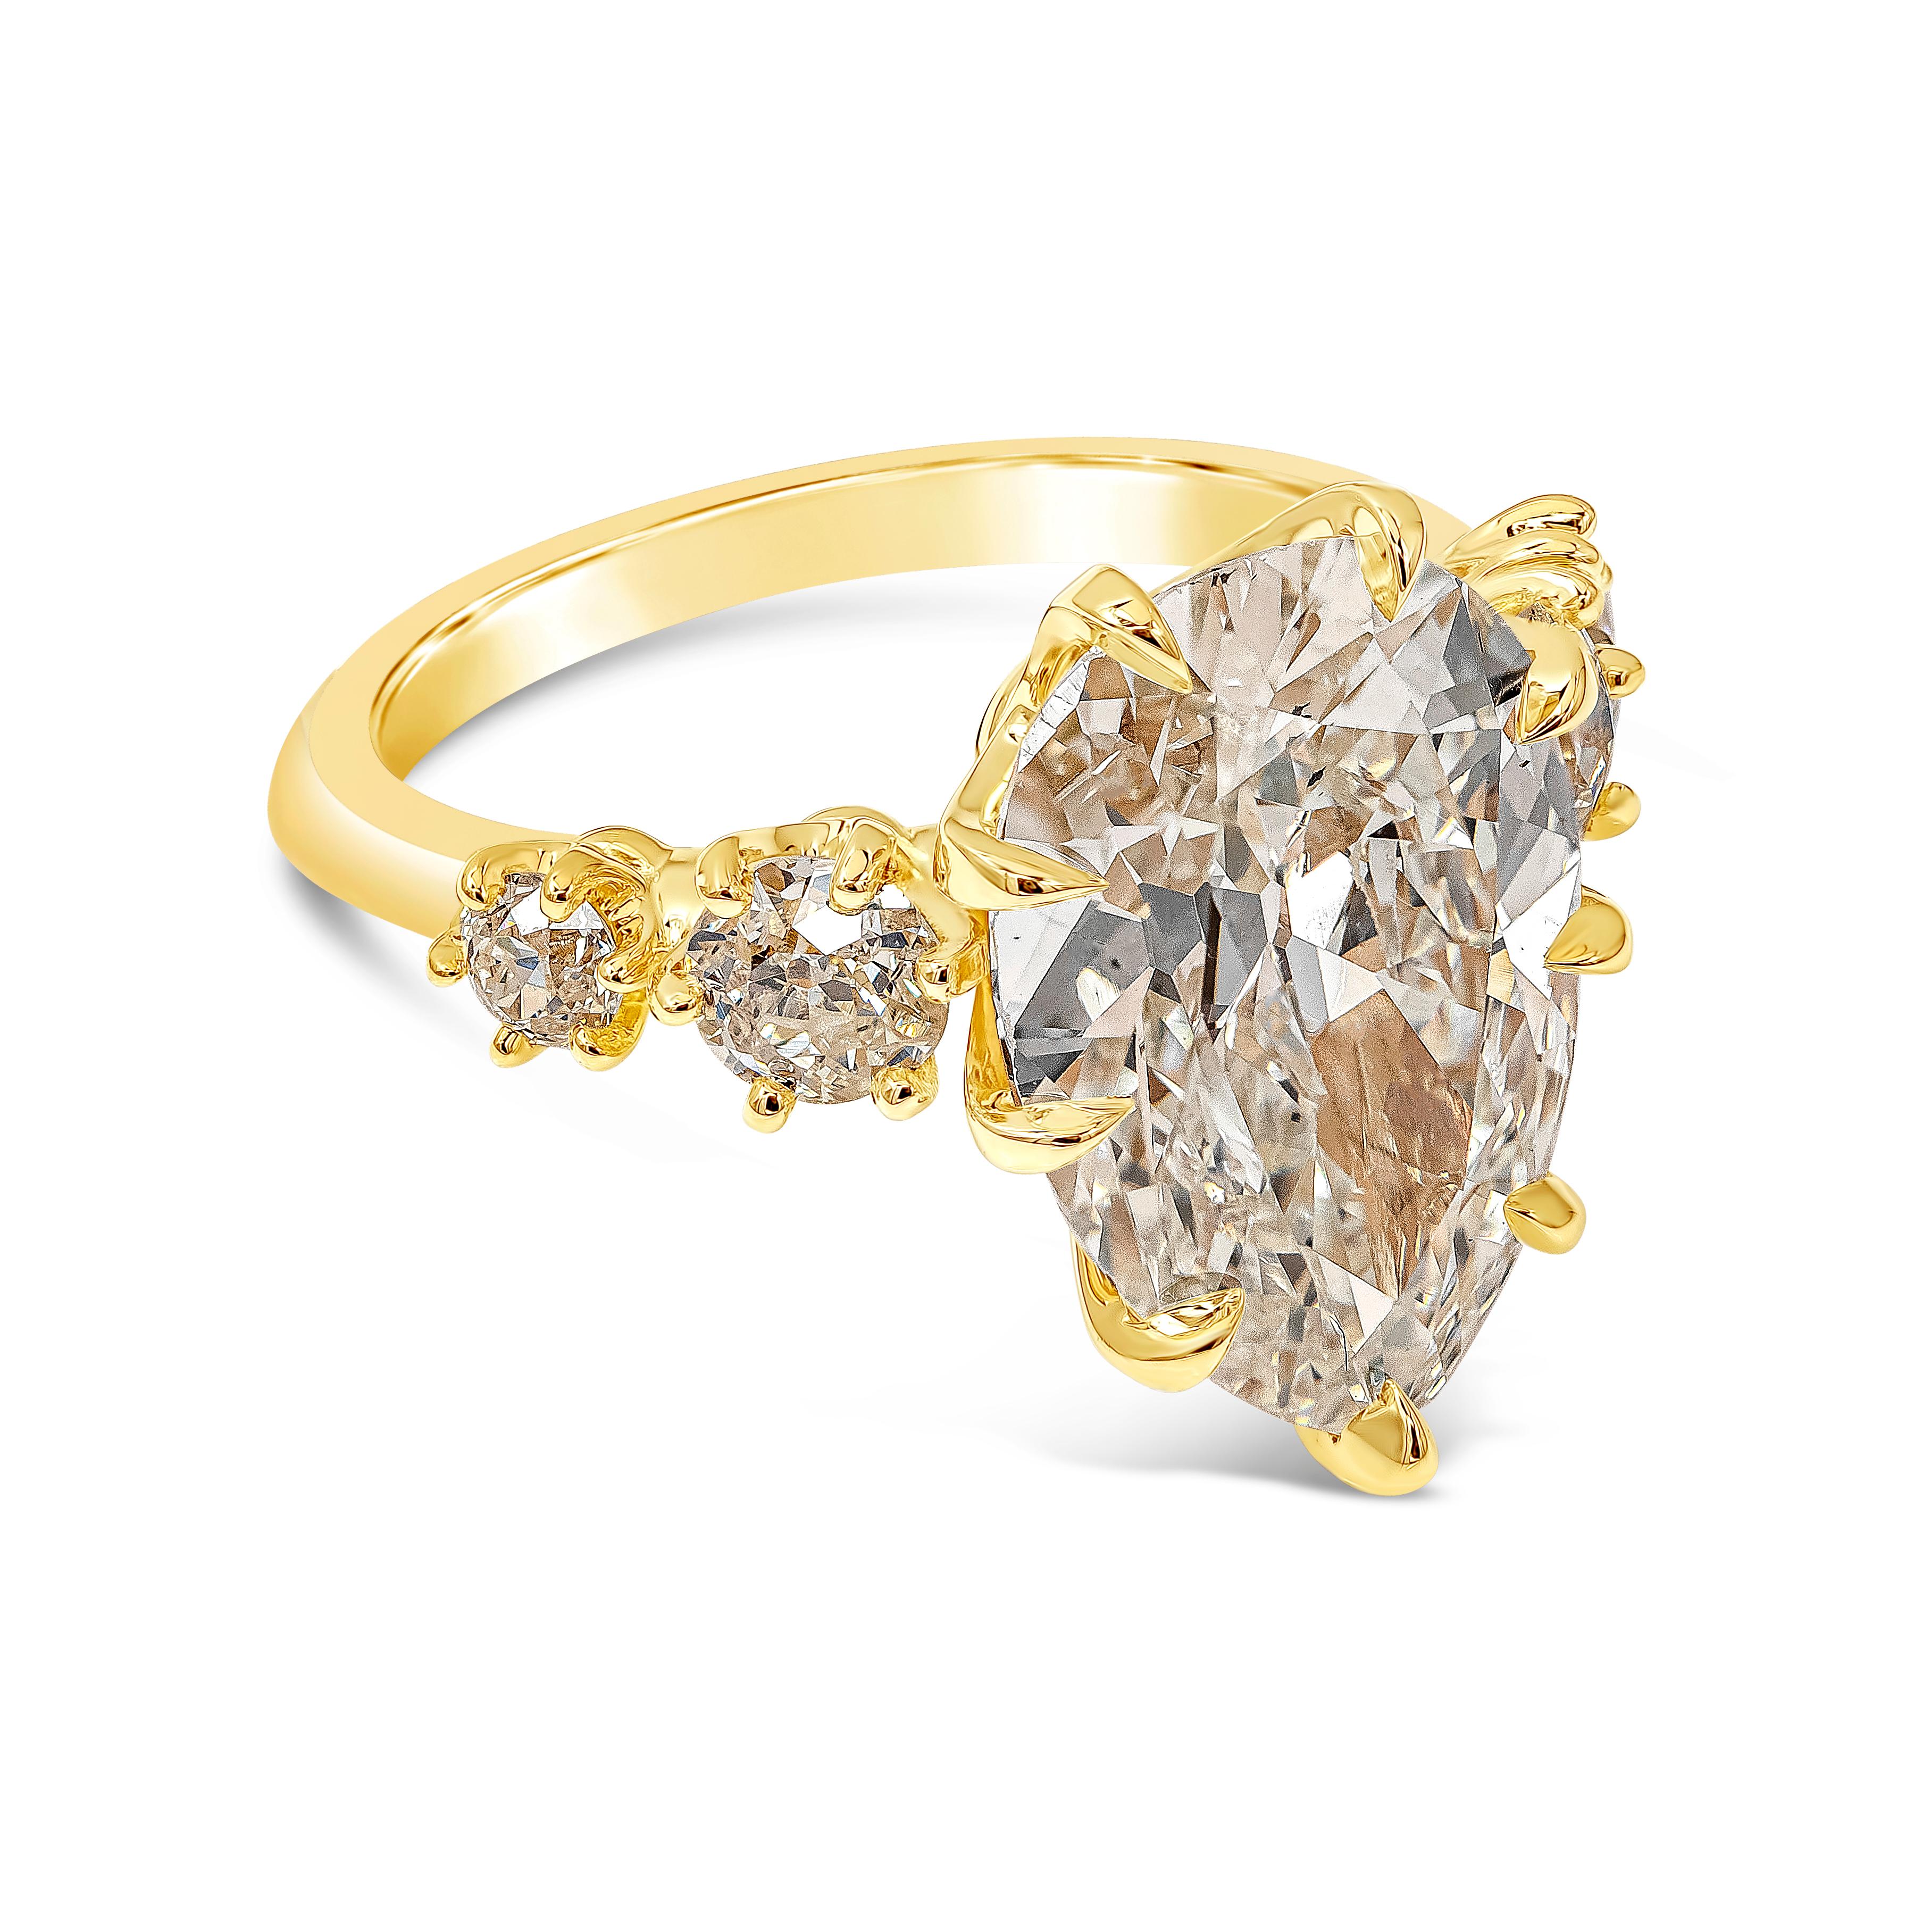 An antique-style engagement ring showcasing a 5.95 carat pear shape diamond certified by GIA as L color, SI1 in clarity. Flanked by 4 old-mine cut diamonds on either side weighing 0.83 carats total. Set in a handcrafted 18k yellow gold basket. Size